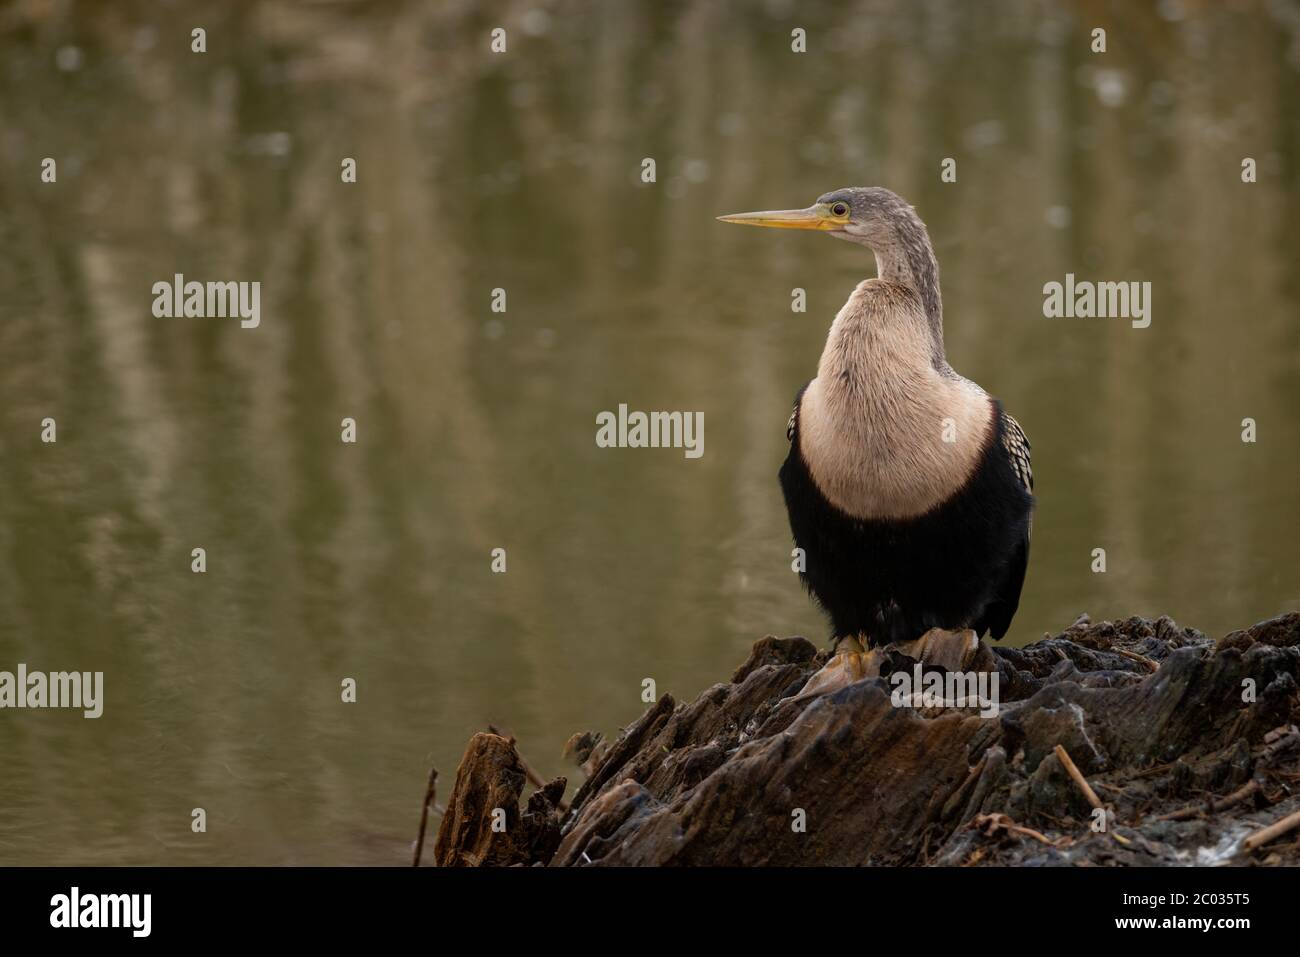 Anhinga sometimes called snakebird, darter, American darter, or water turkey perched on an old wood stump in a marsh on a cloudy overcast winter day Stock Photo